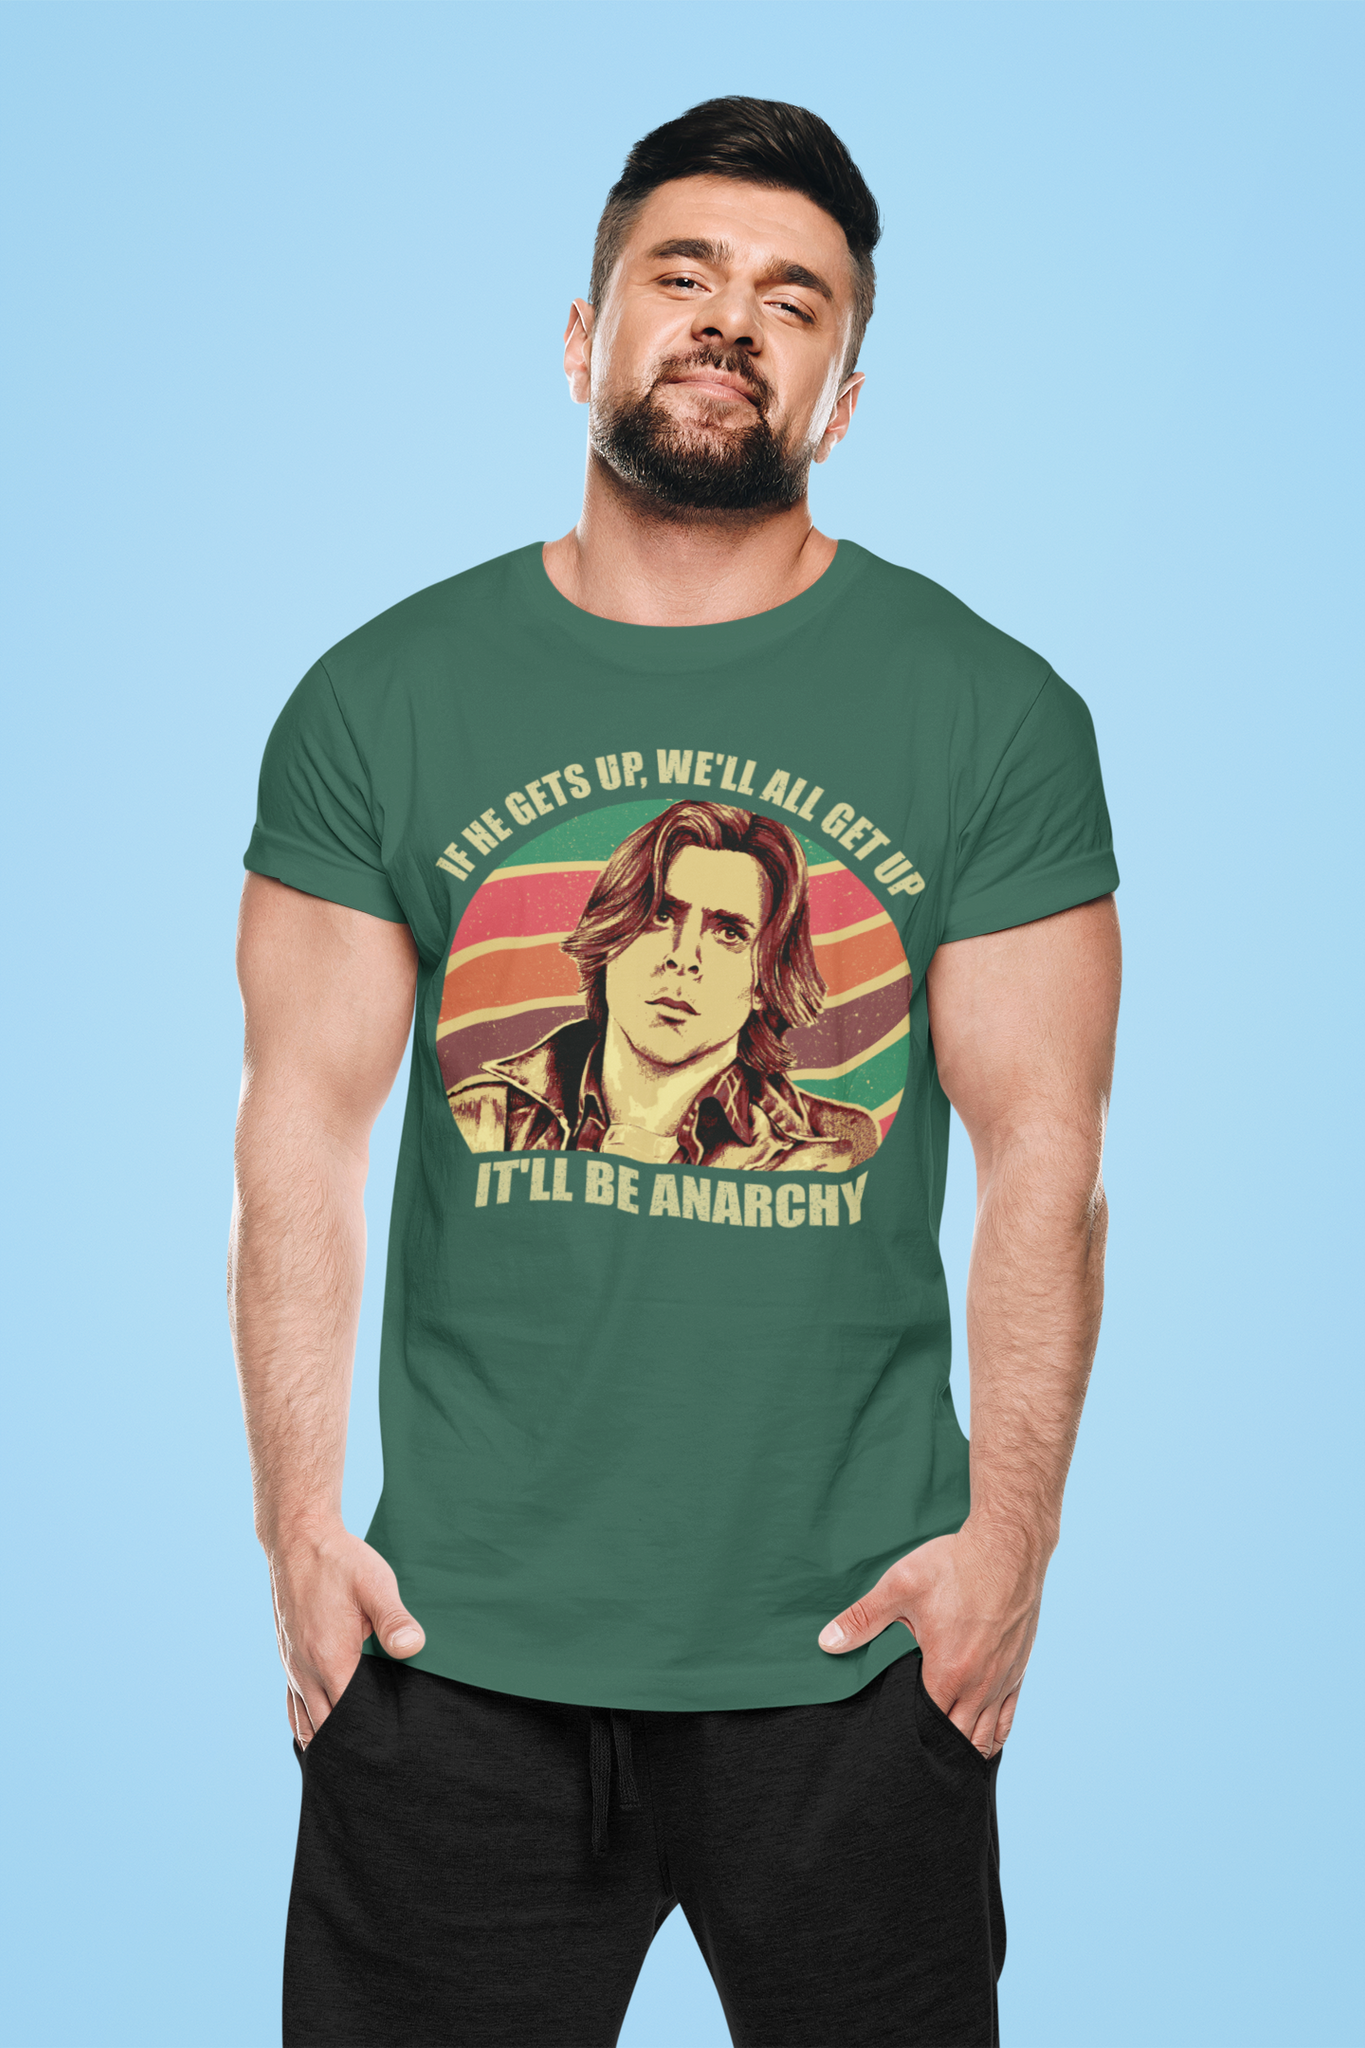 Breakfast Club Vintage T Shirt, John Bender T Shirt, If He Gets Up Well All Get Up Itll Be Anarchy Tshirt